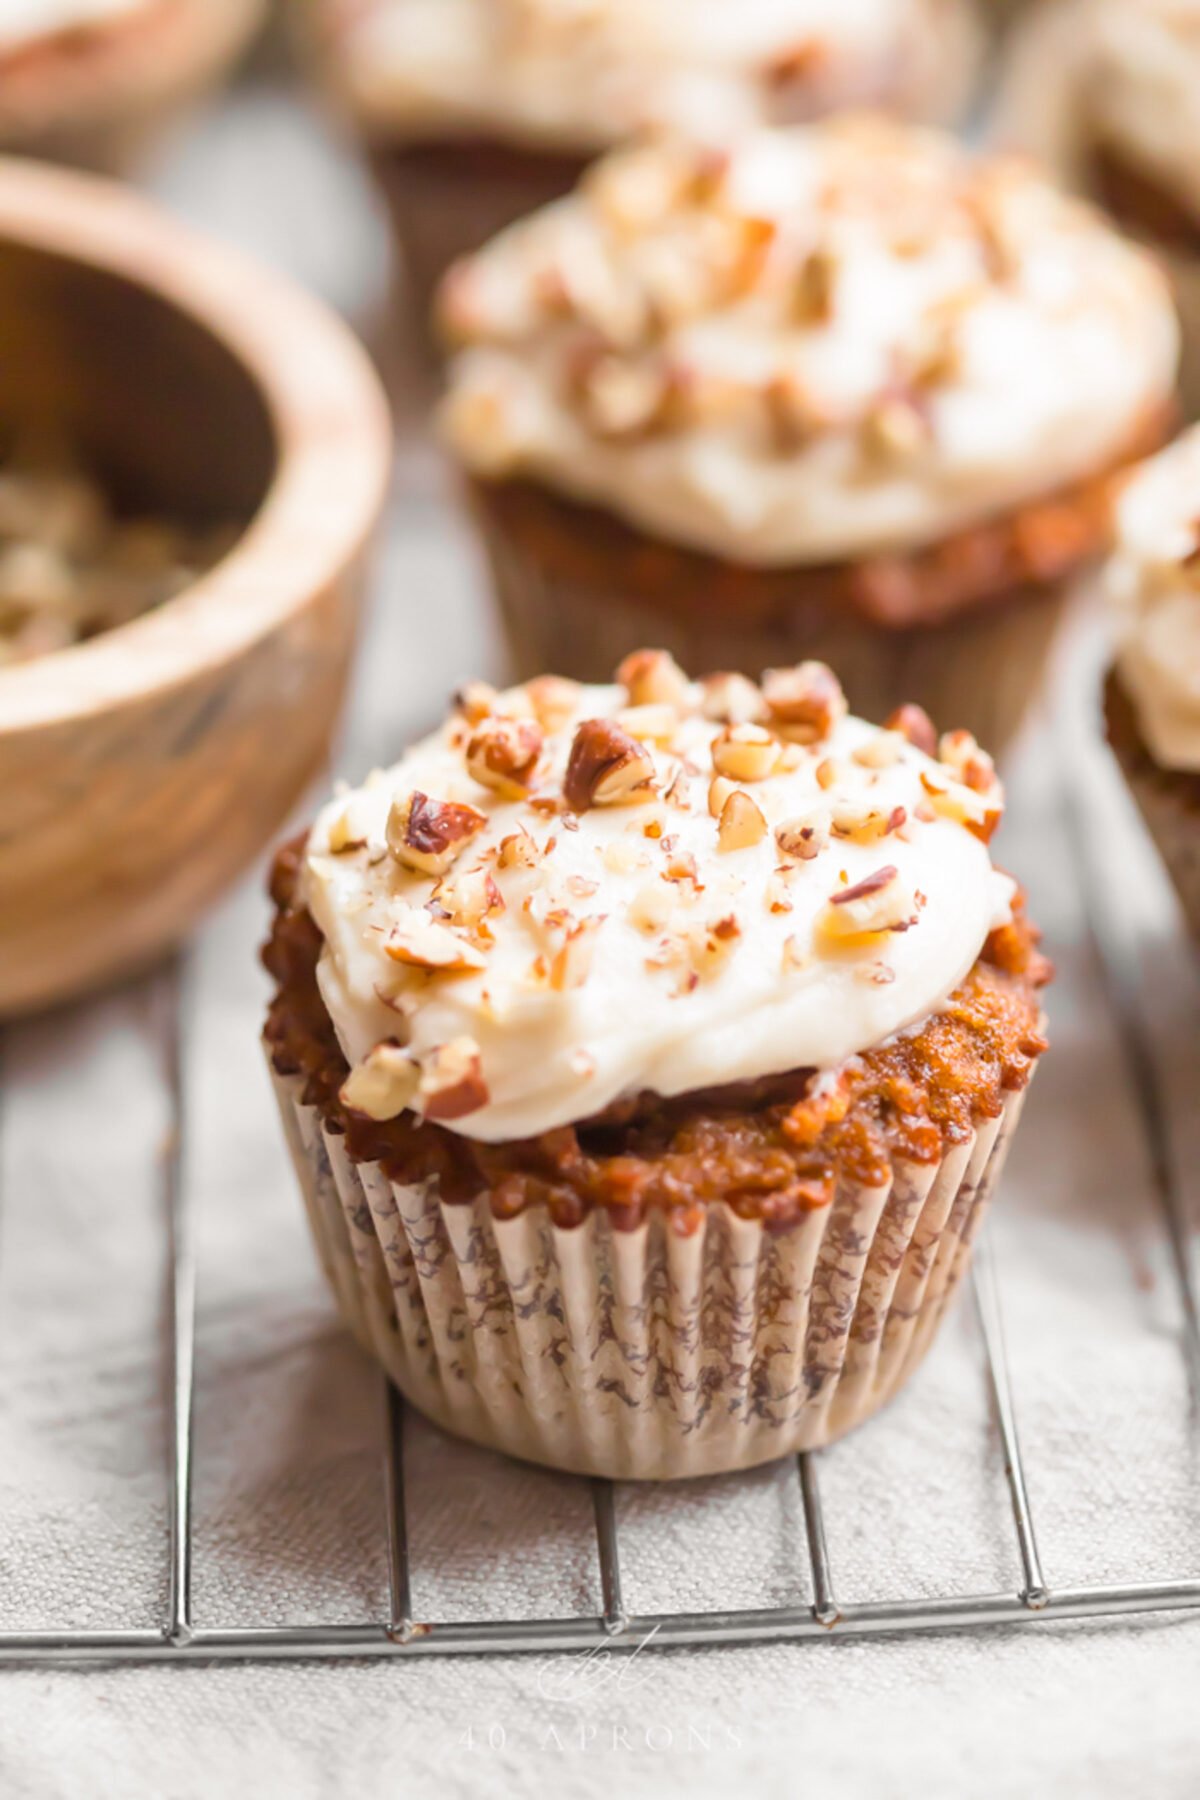 Paleo carrot cake cupcakes with cream cheese frosting on a wire cooling rack.